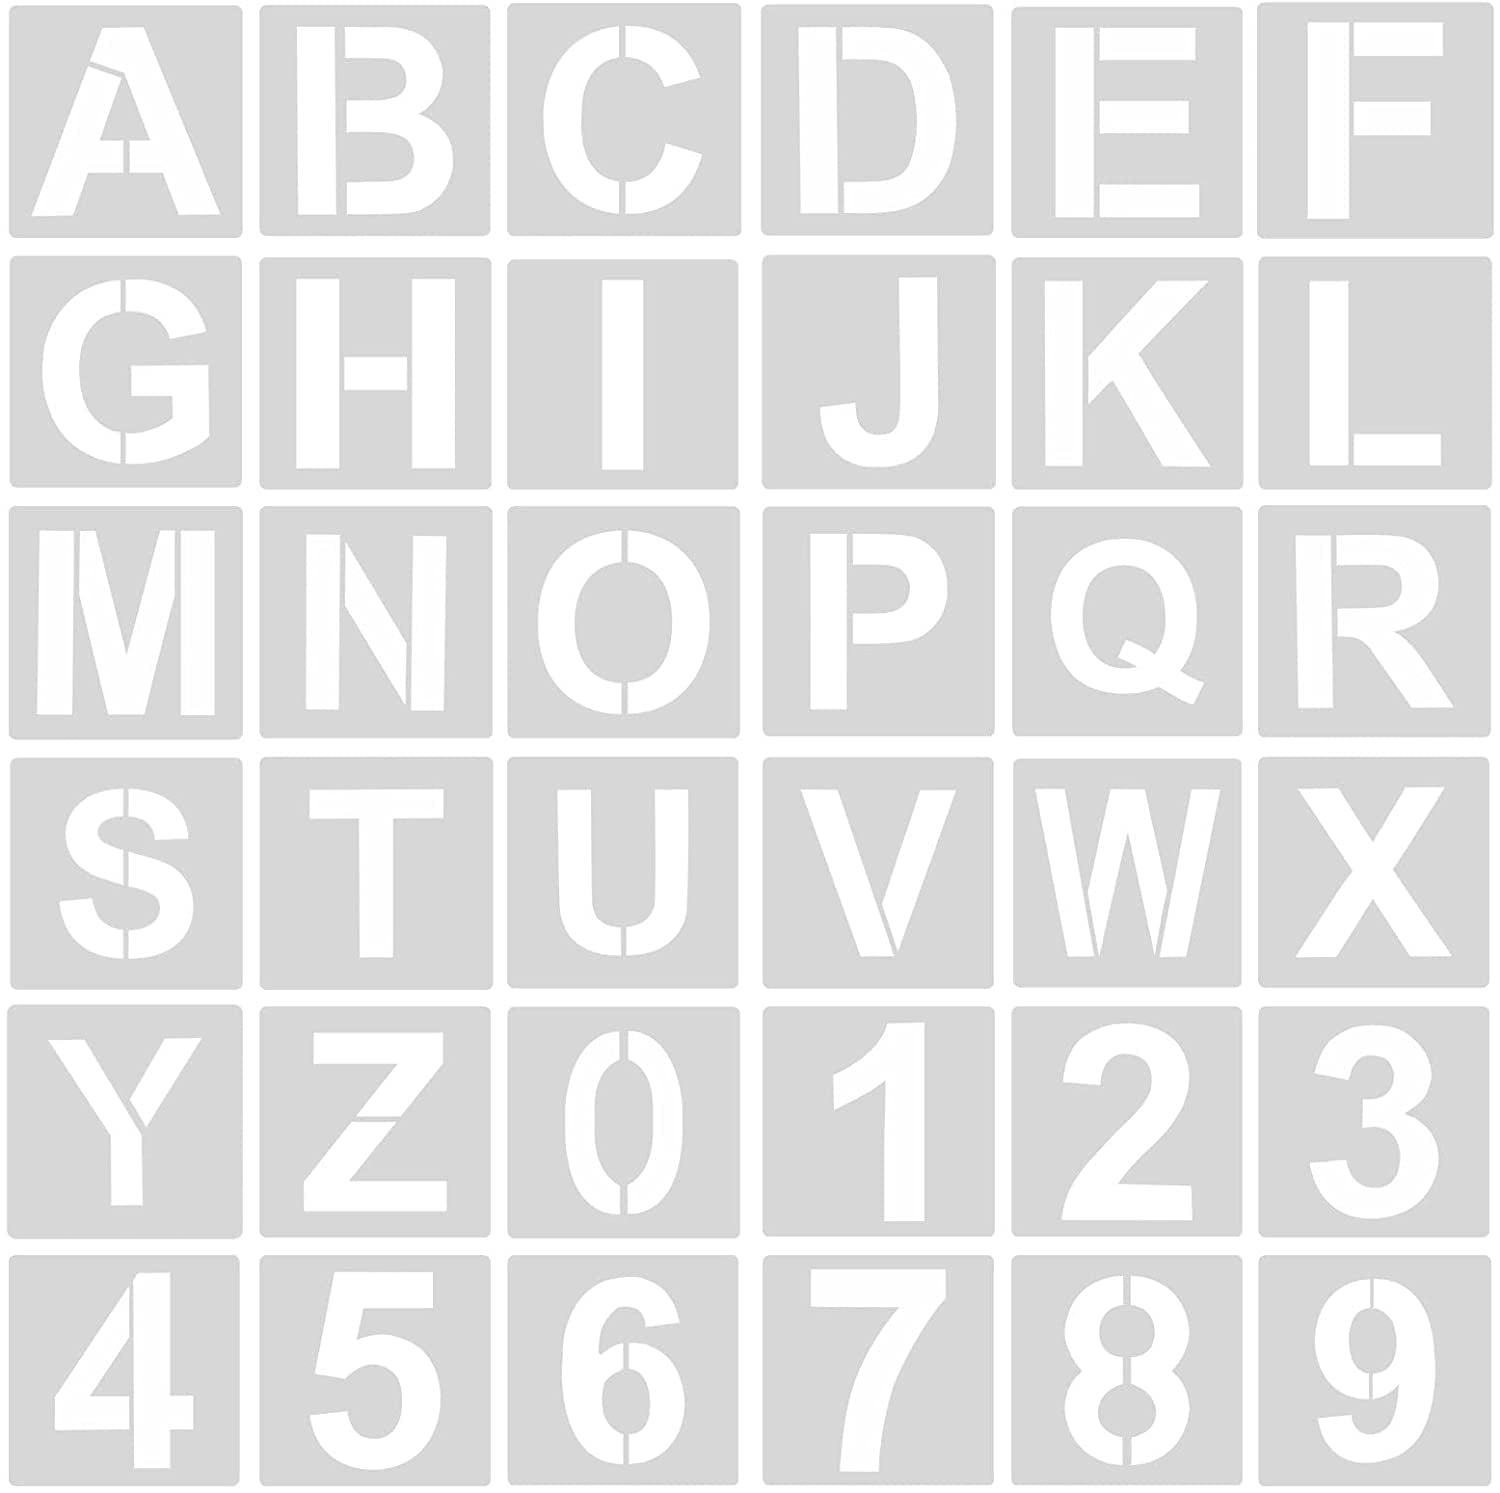 Numbers Reusable Alphabet Stencils with Letters Zrnmrle 36 Pack Letter Stencils for Kids Patterns and Symbols for Drawing Journal DIY Craft Project 